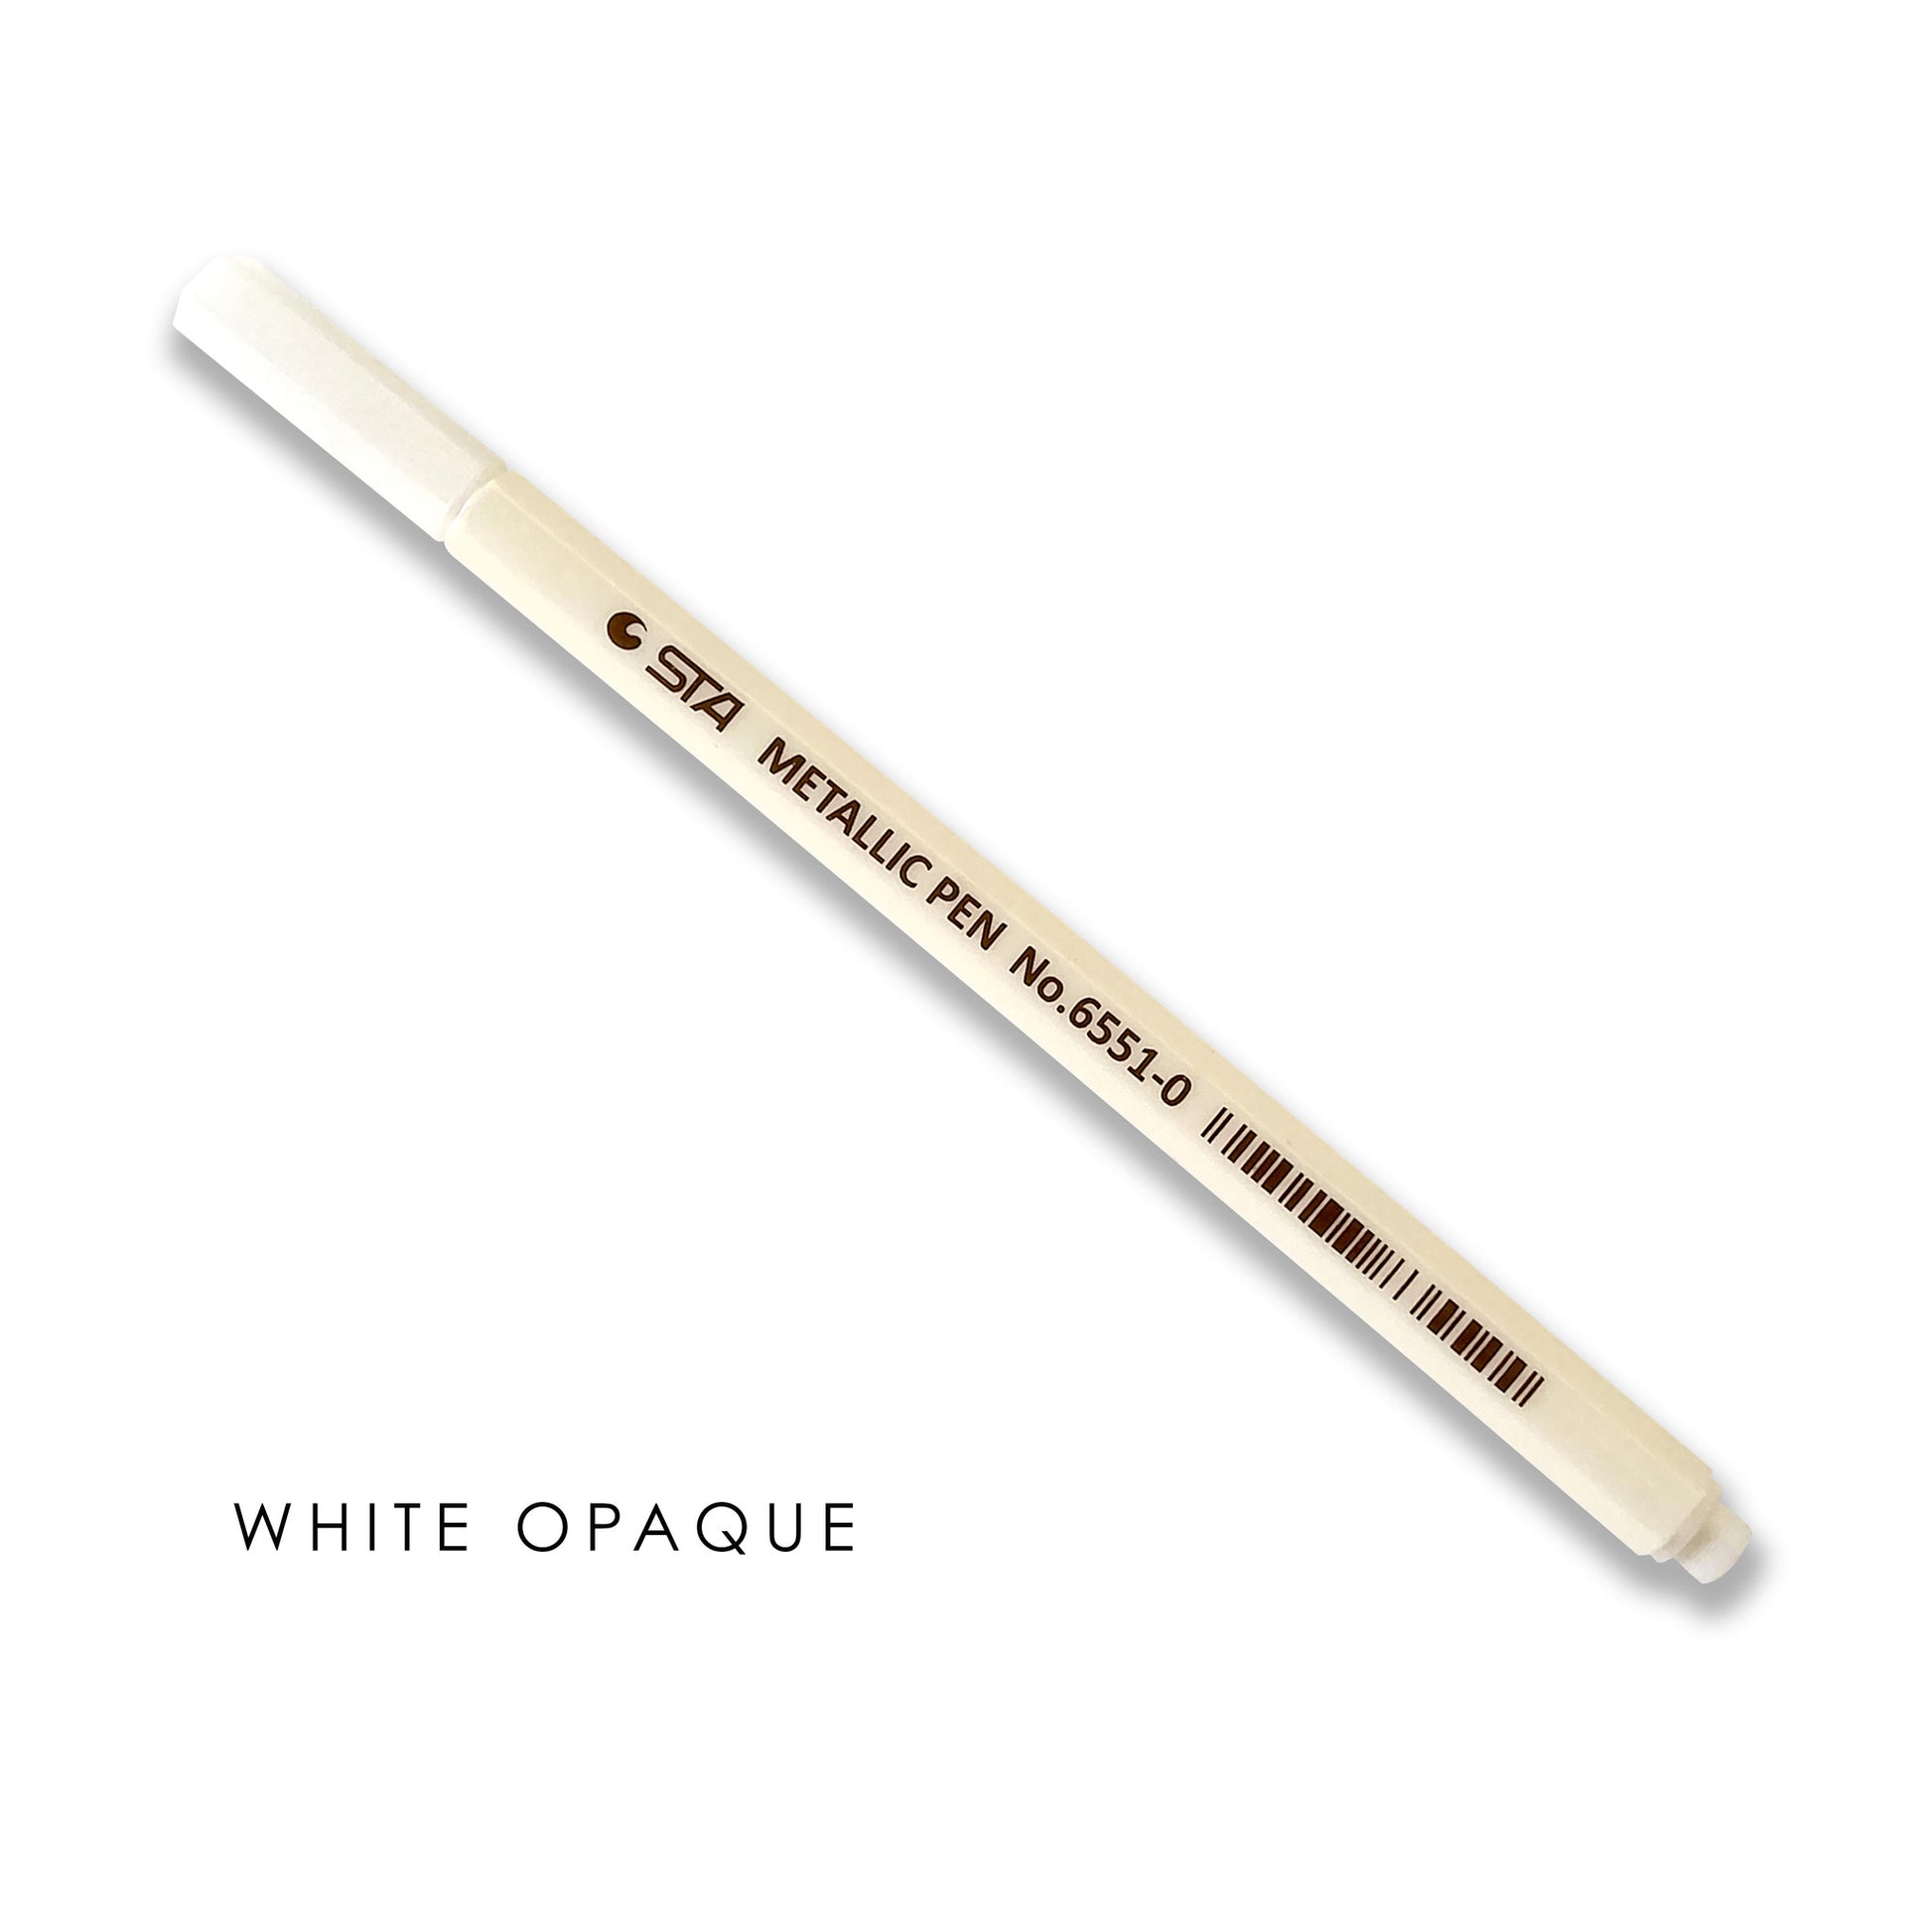 White opaque STA marker for guest book